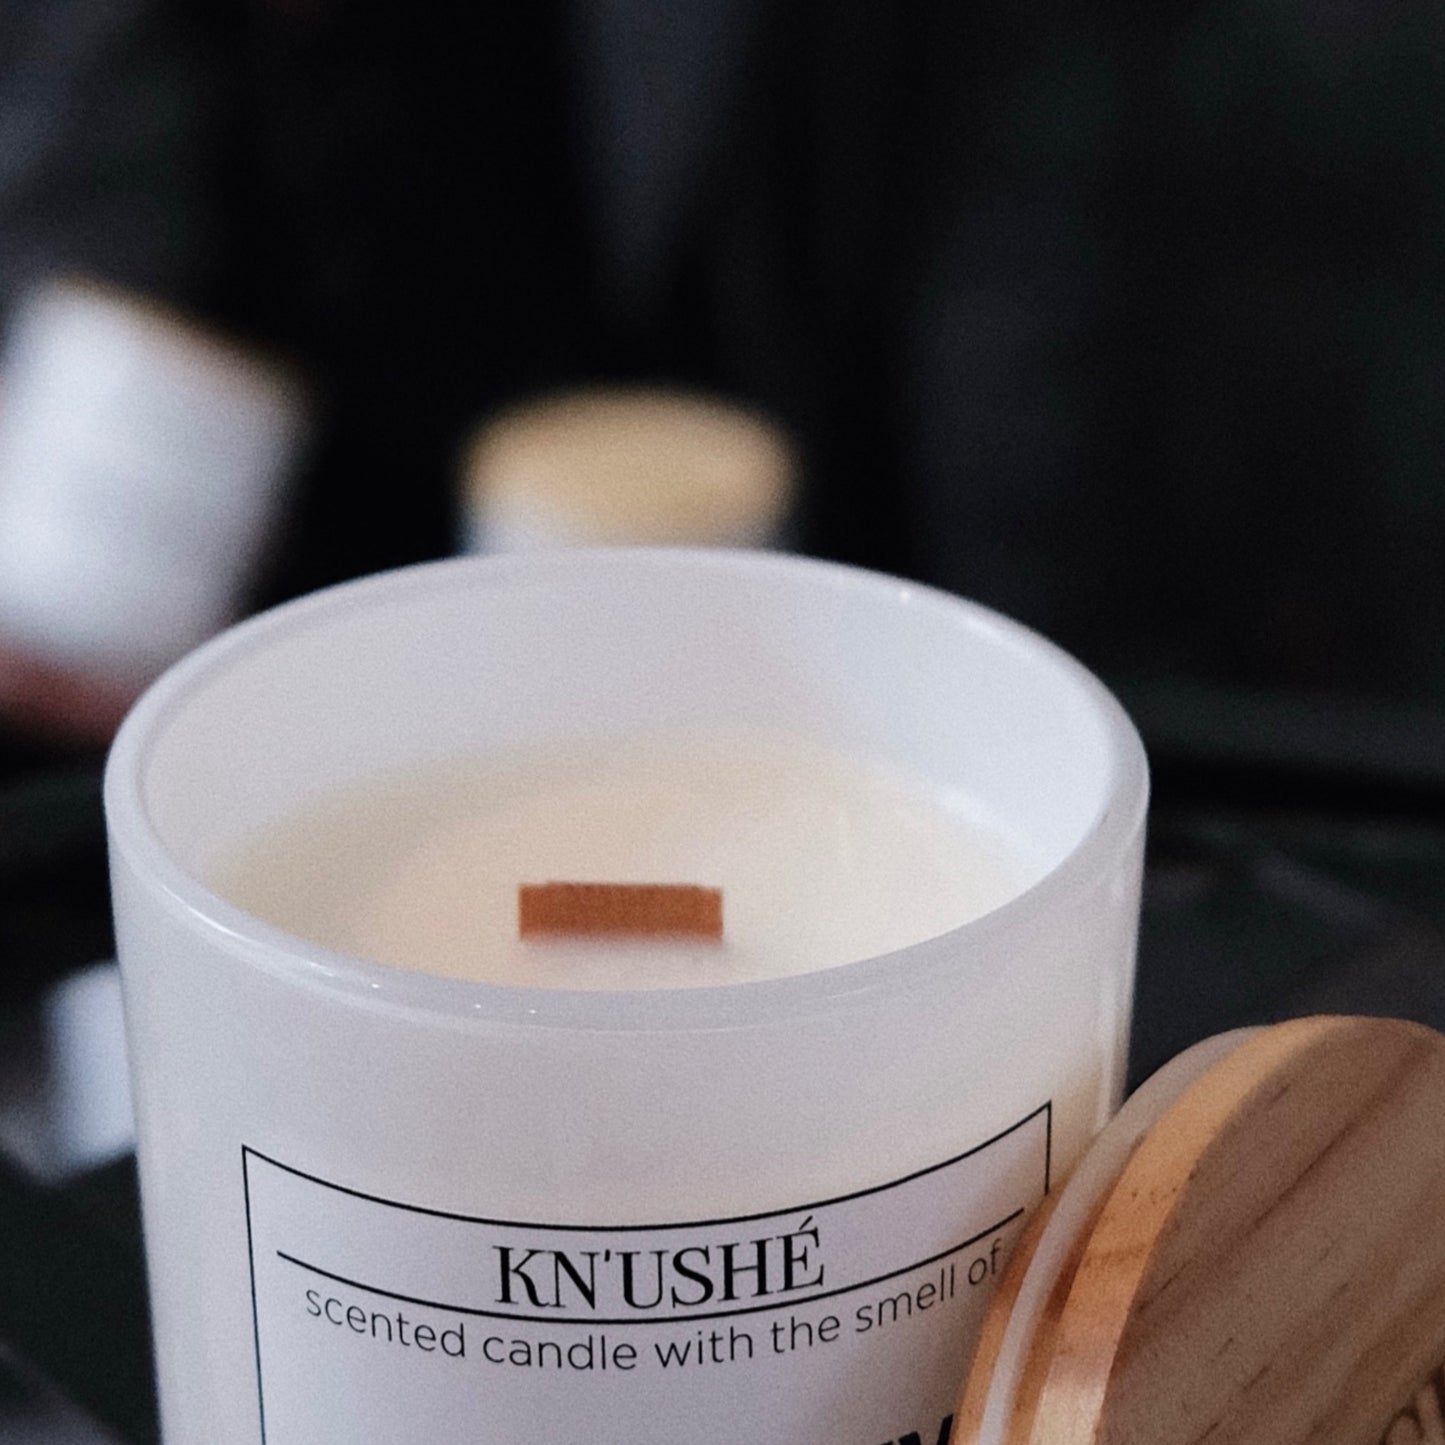 Scented candle  with the smell of "SELF-LOVE"